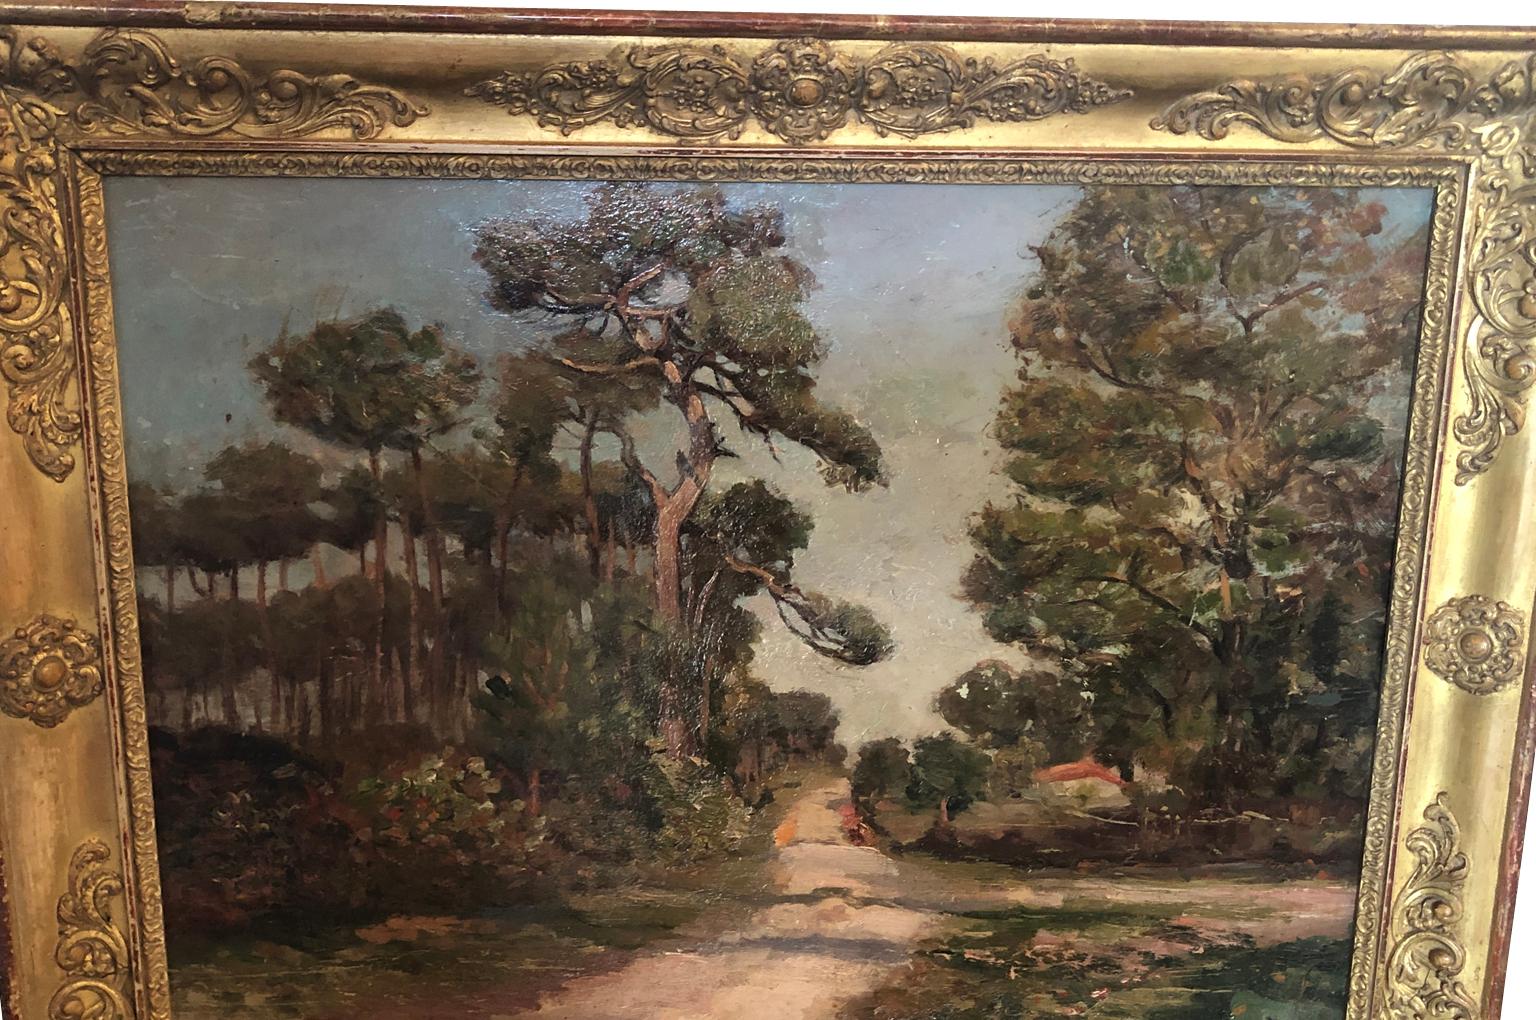 A very beautiful late 19th-early 20th century oil painting housed in its period Restoration giltwood frame. A lovely subject matter depicting the Pines of Les Landes, in the French Basque region. Wonderful brush work and texture.